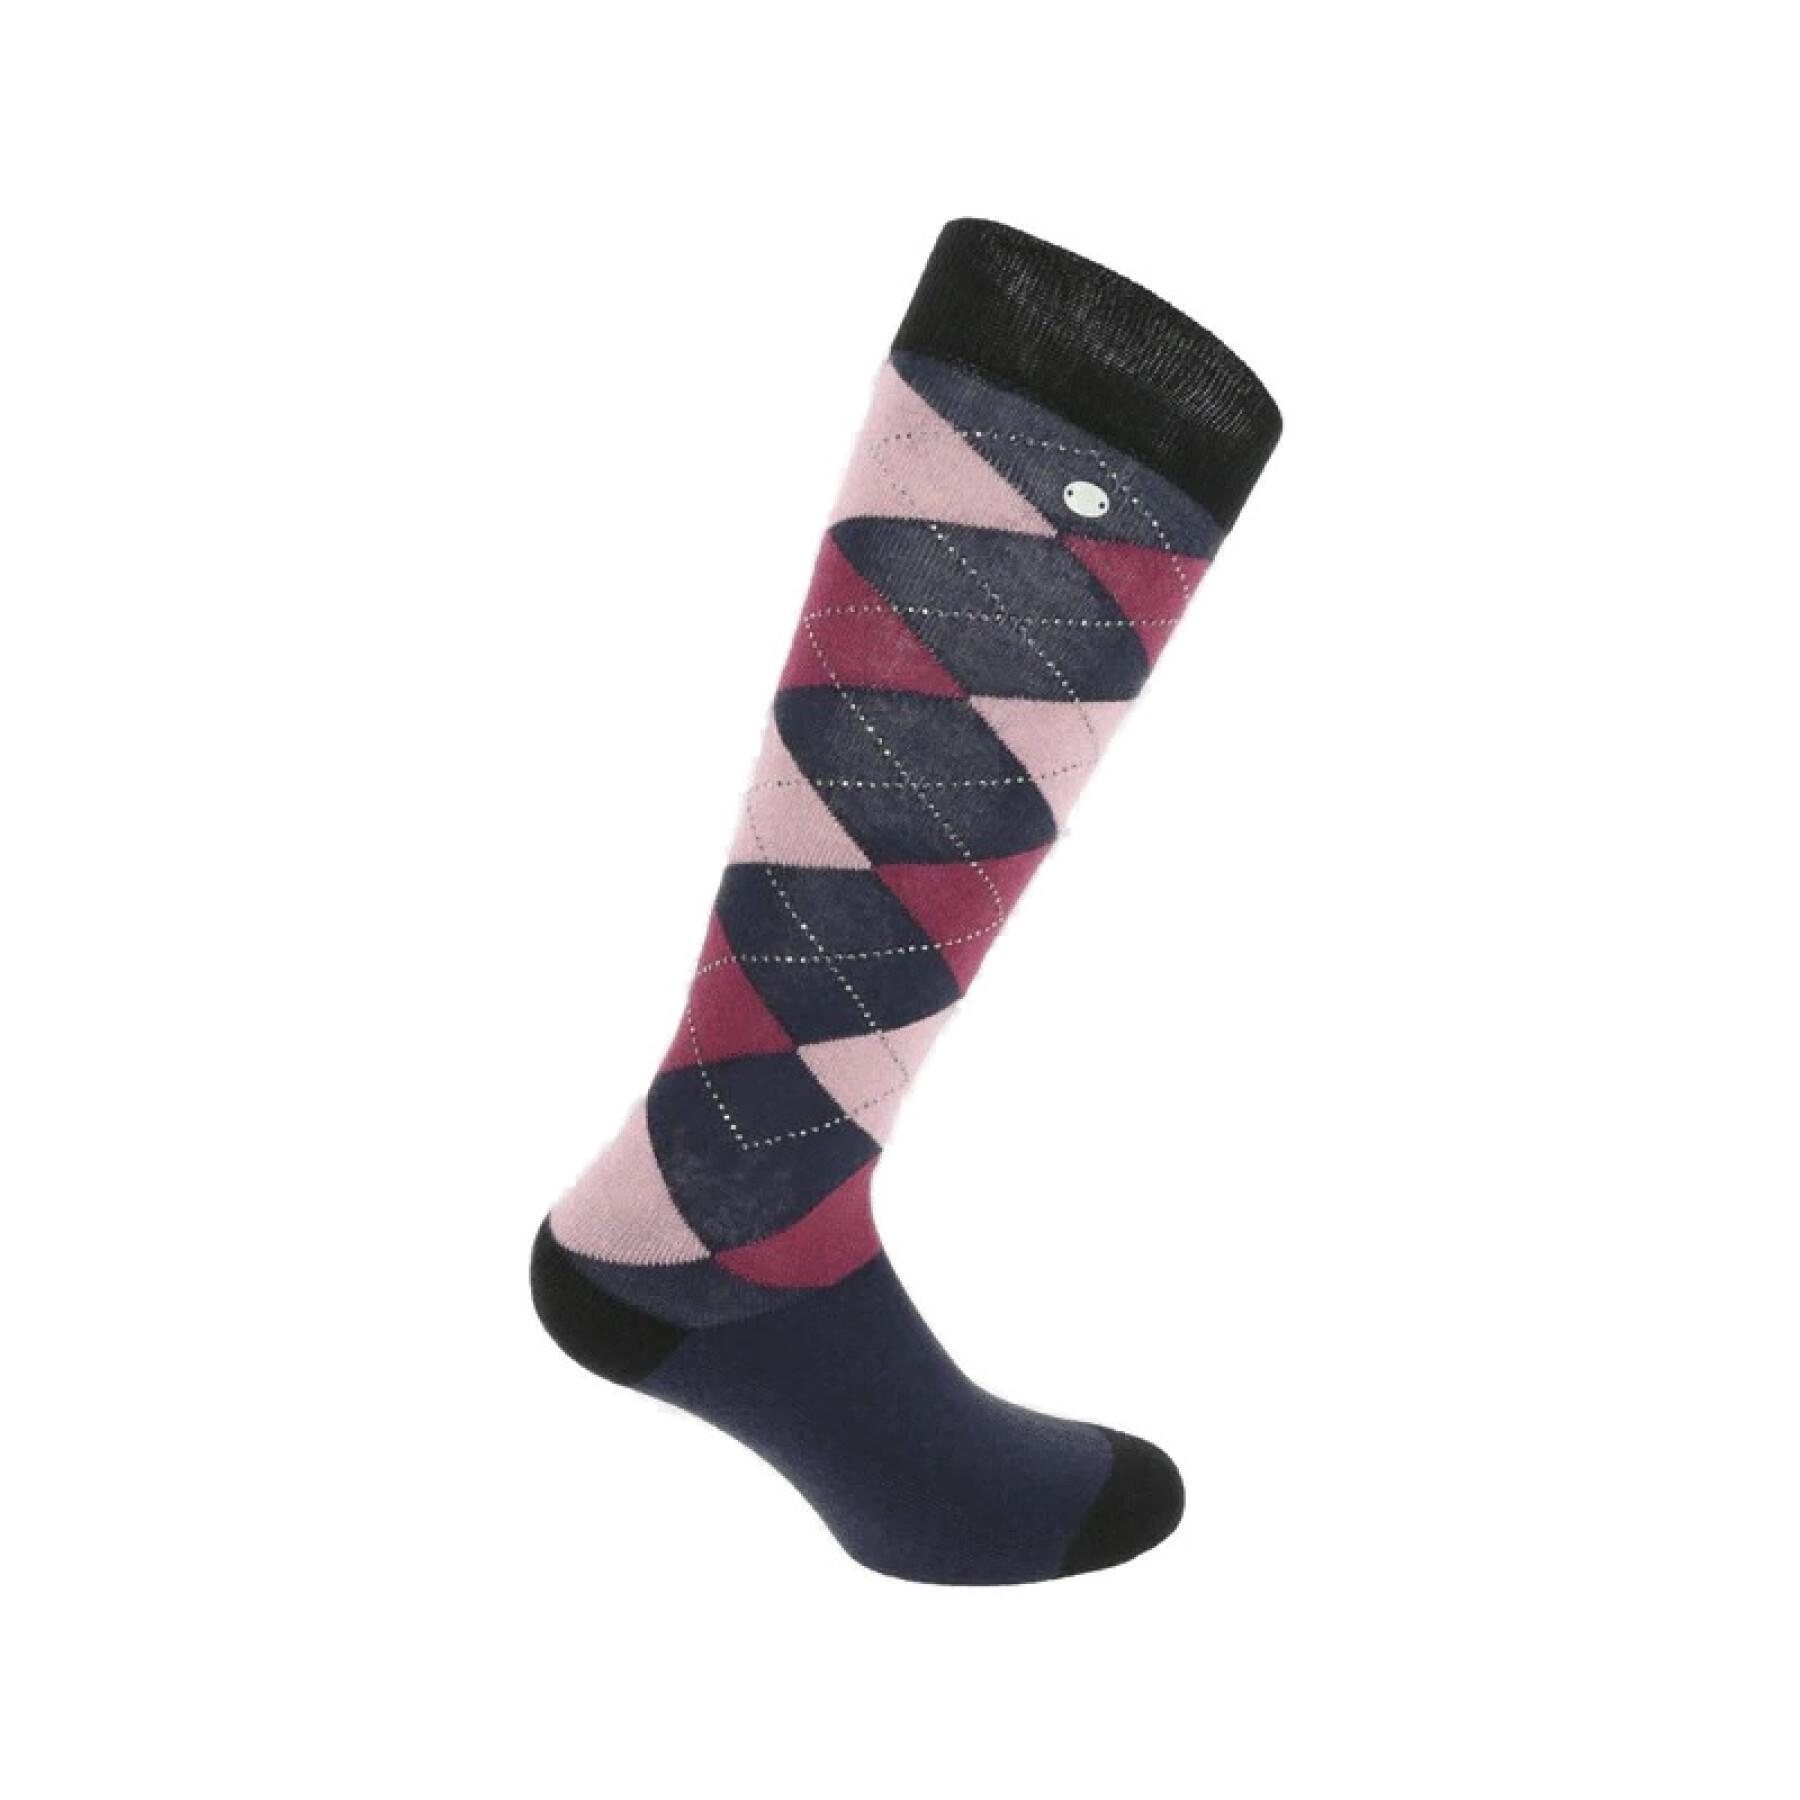 Calcetines de montar para mujer Equithème Girly